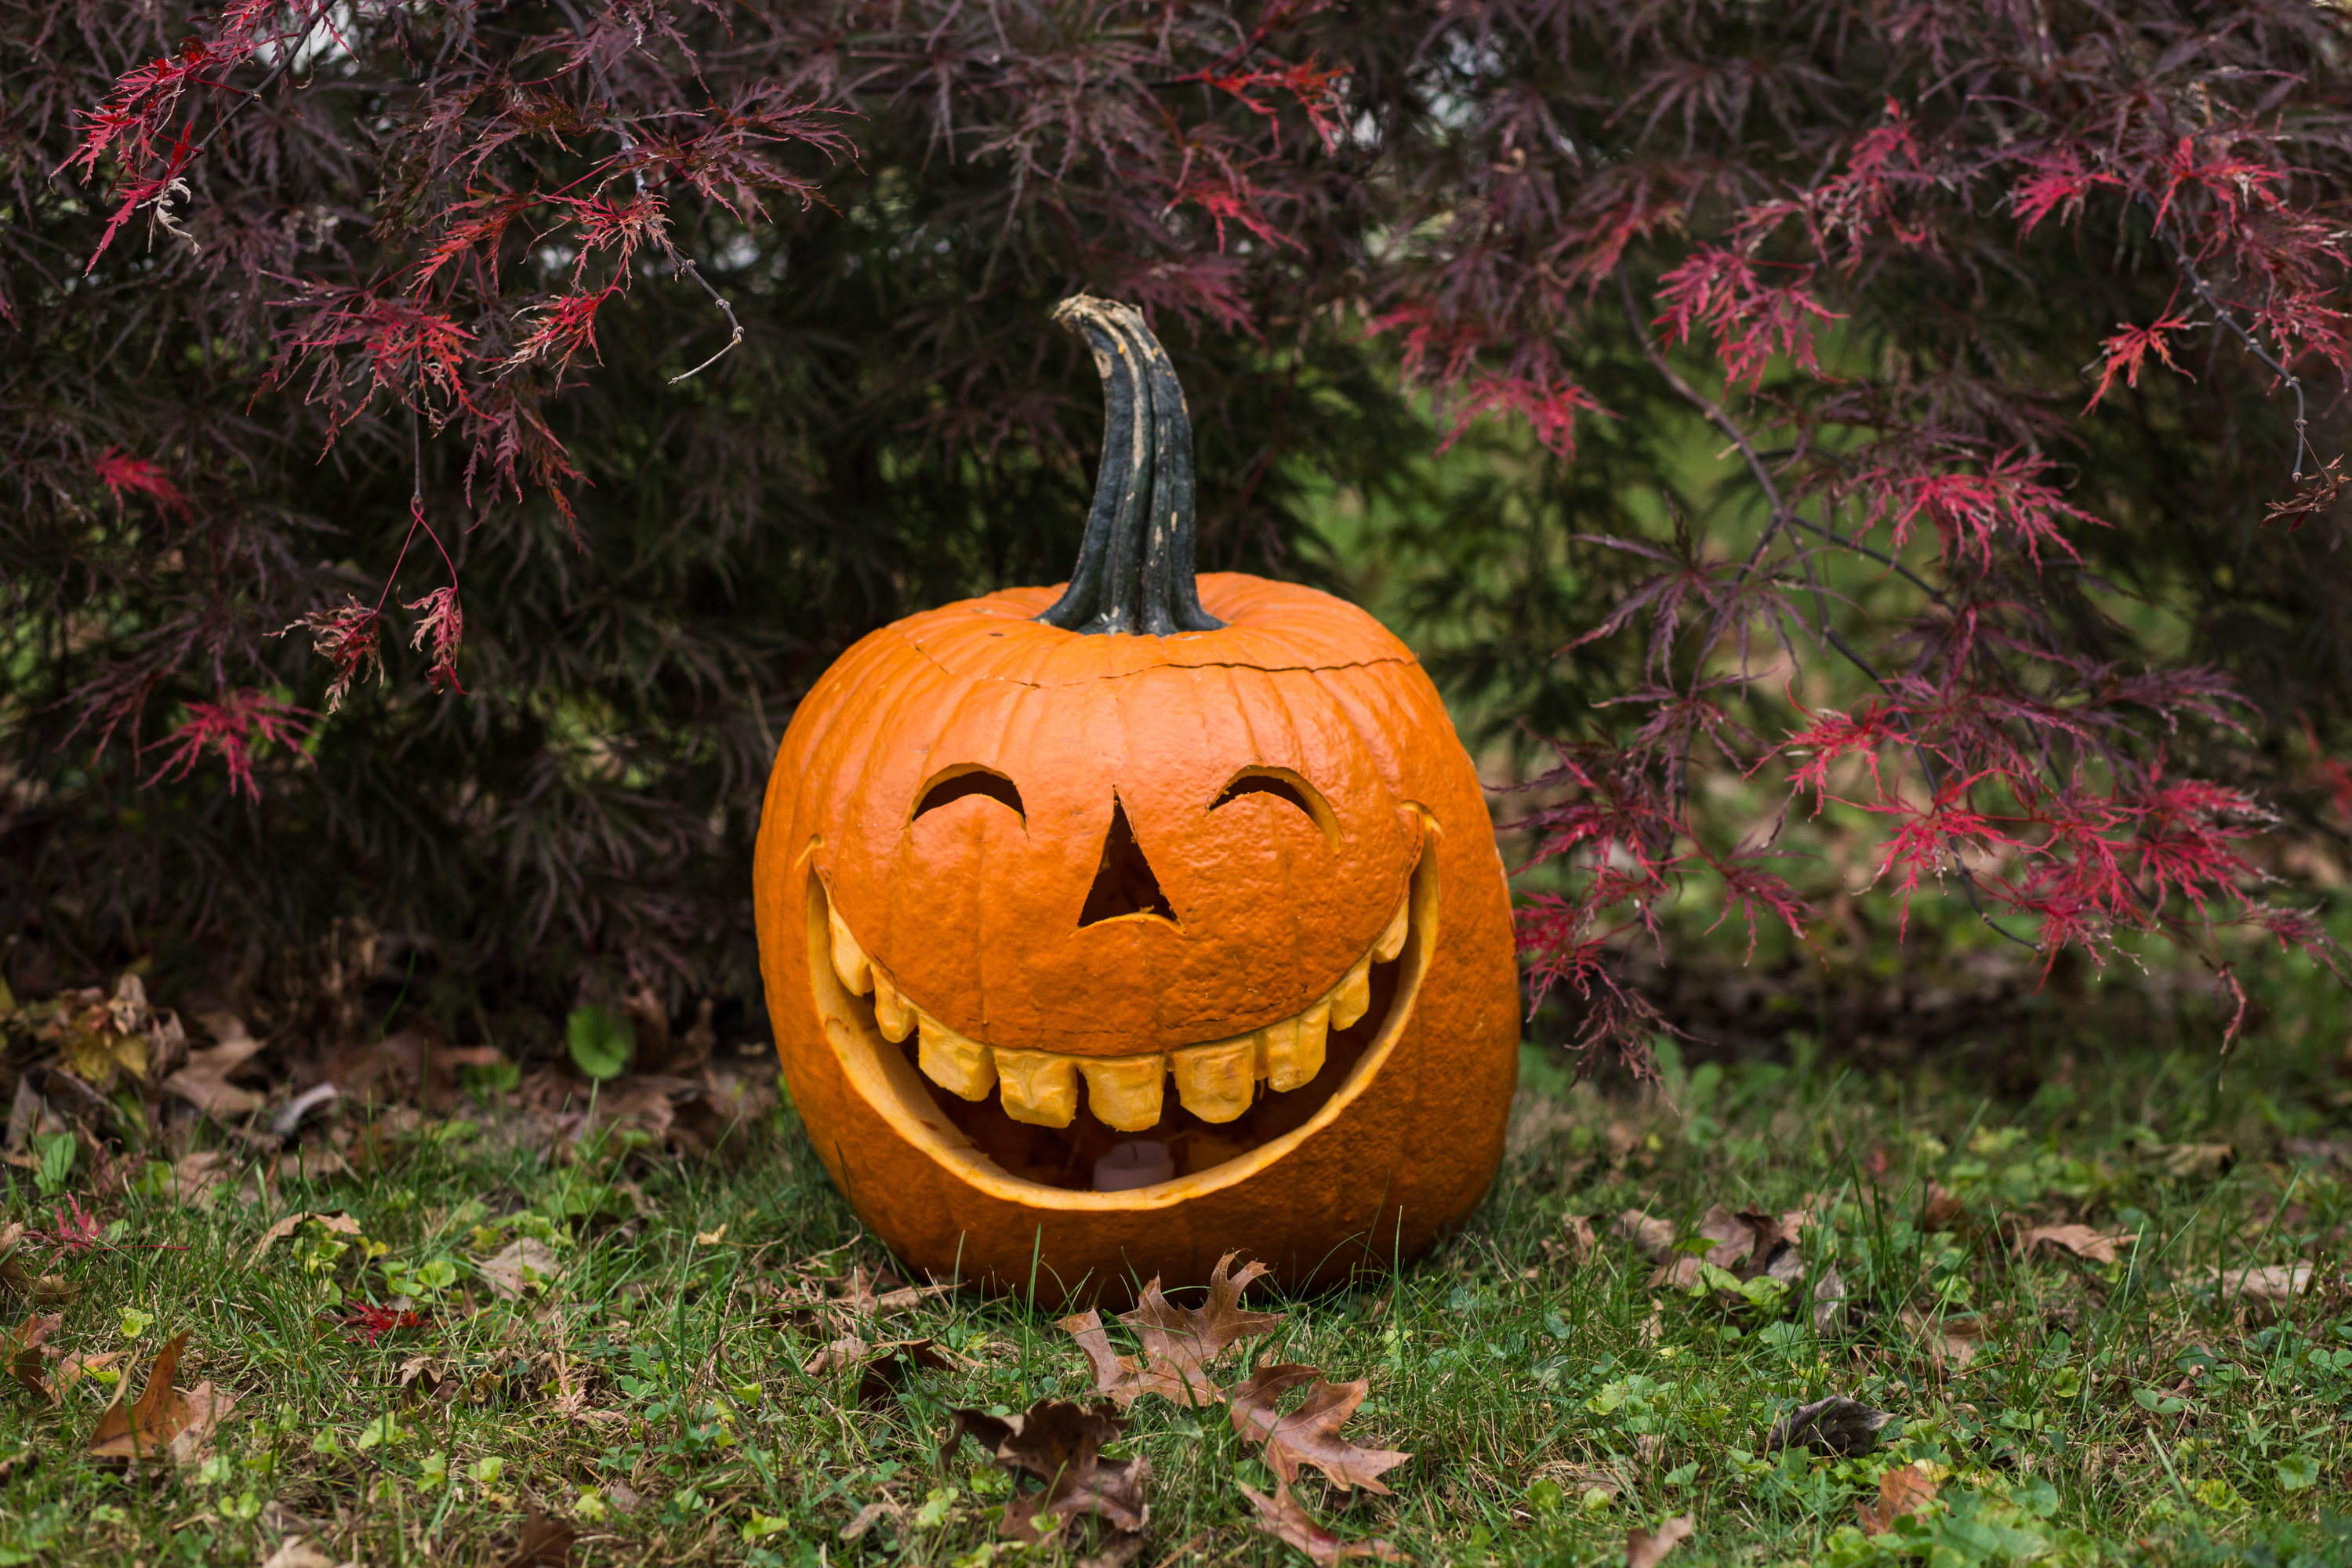 A jolly carved pumpkin for Halloween